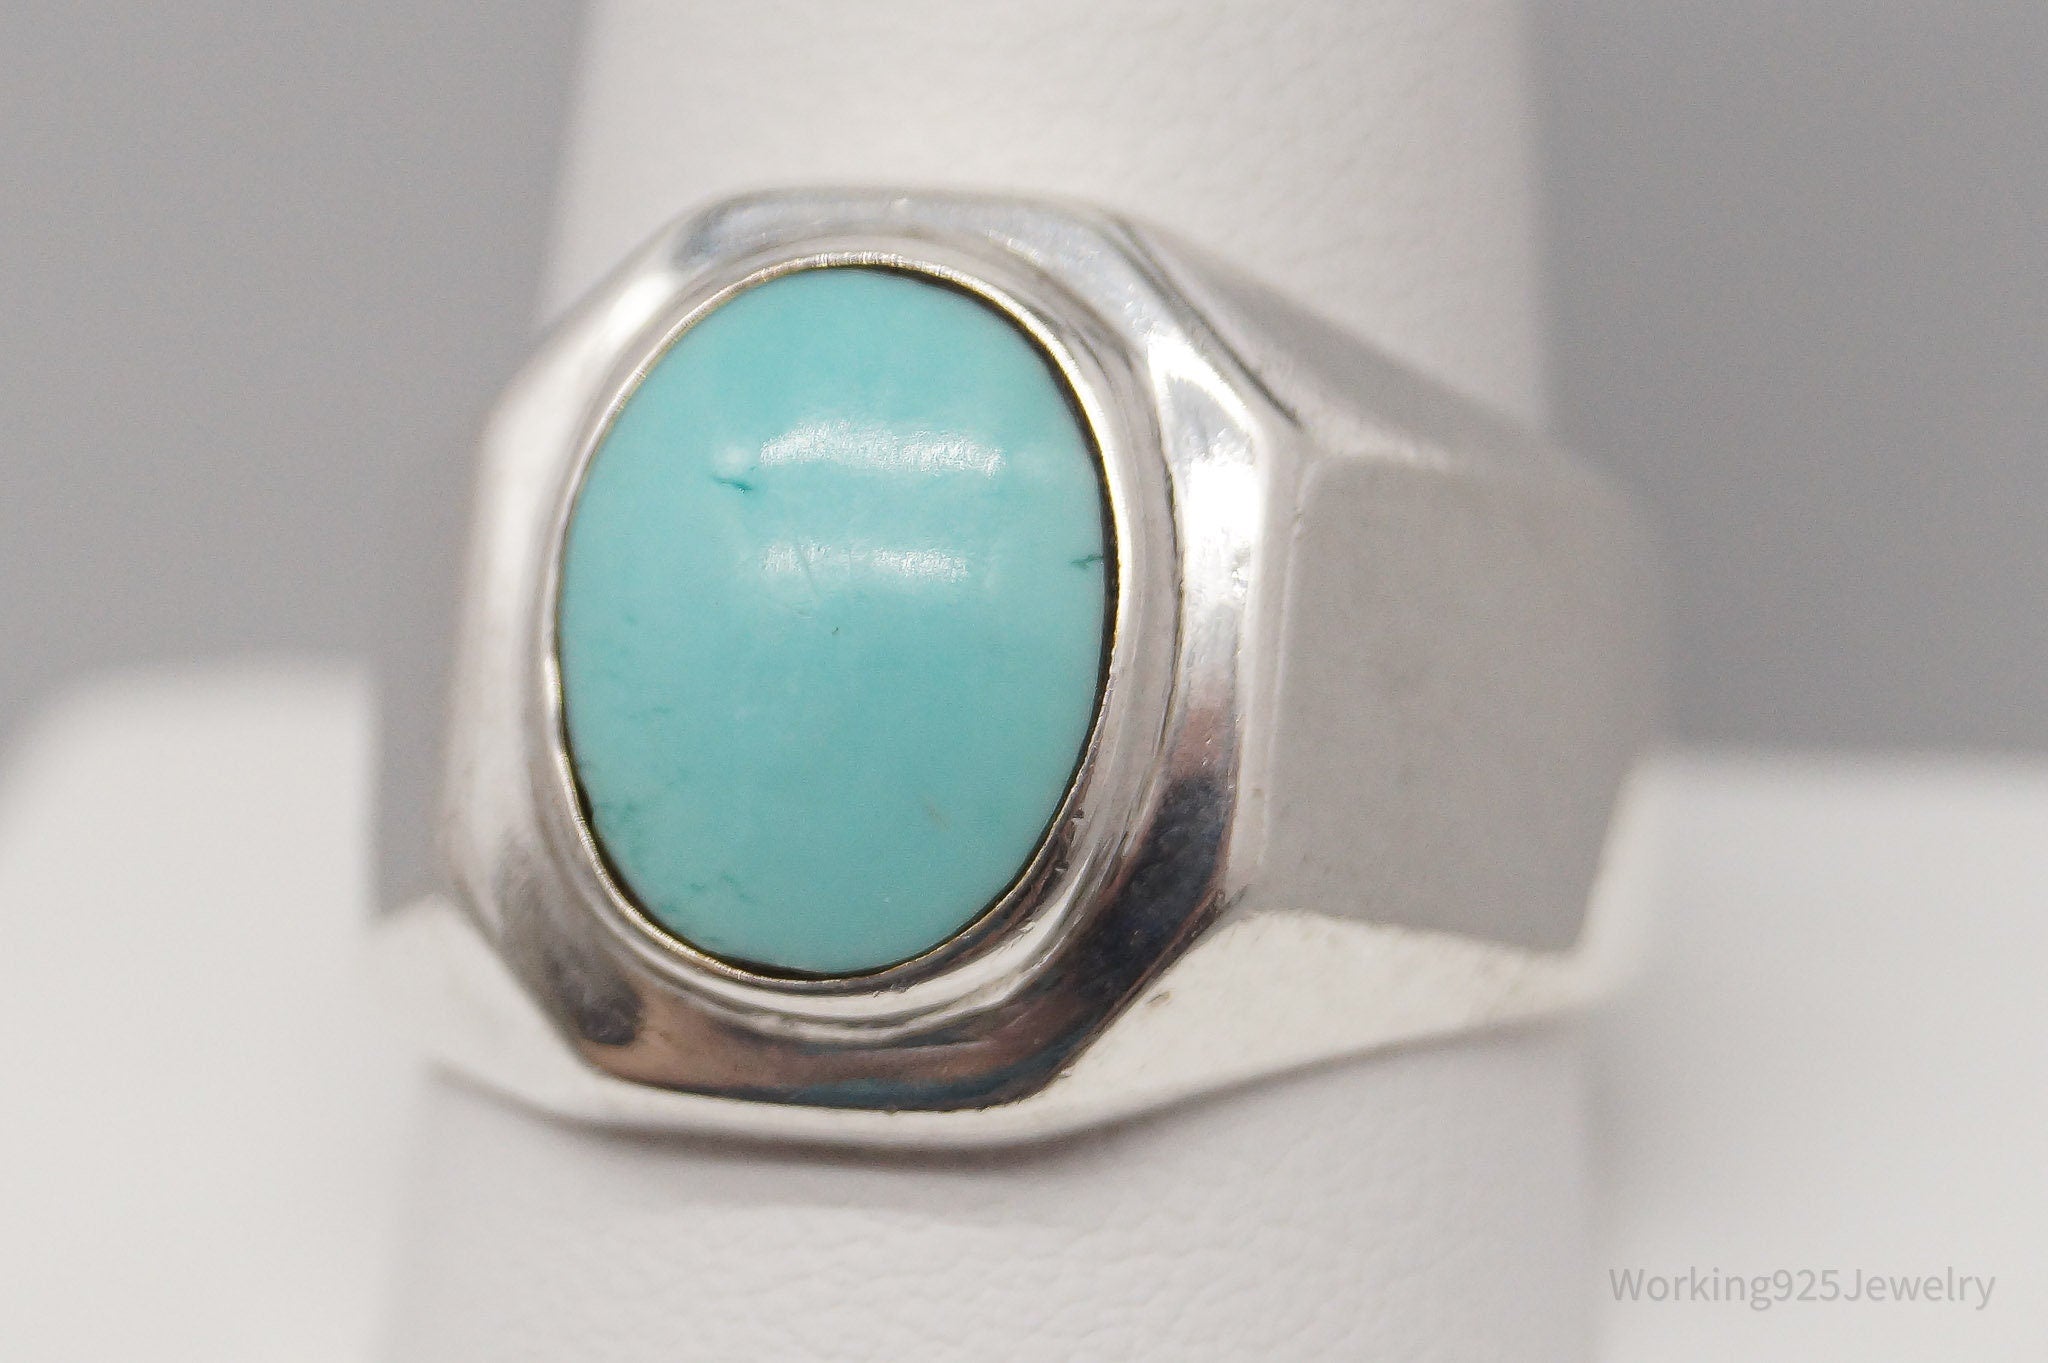 Vintage Mexico Turquoise Sterling Silver Ring - Size 11.25